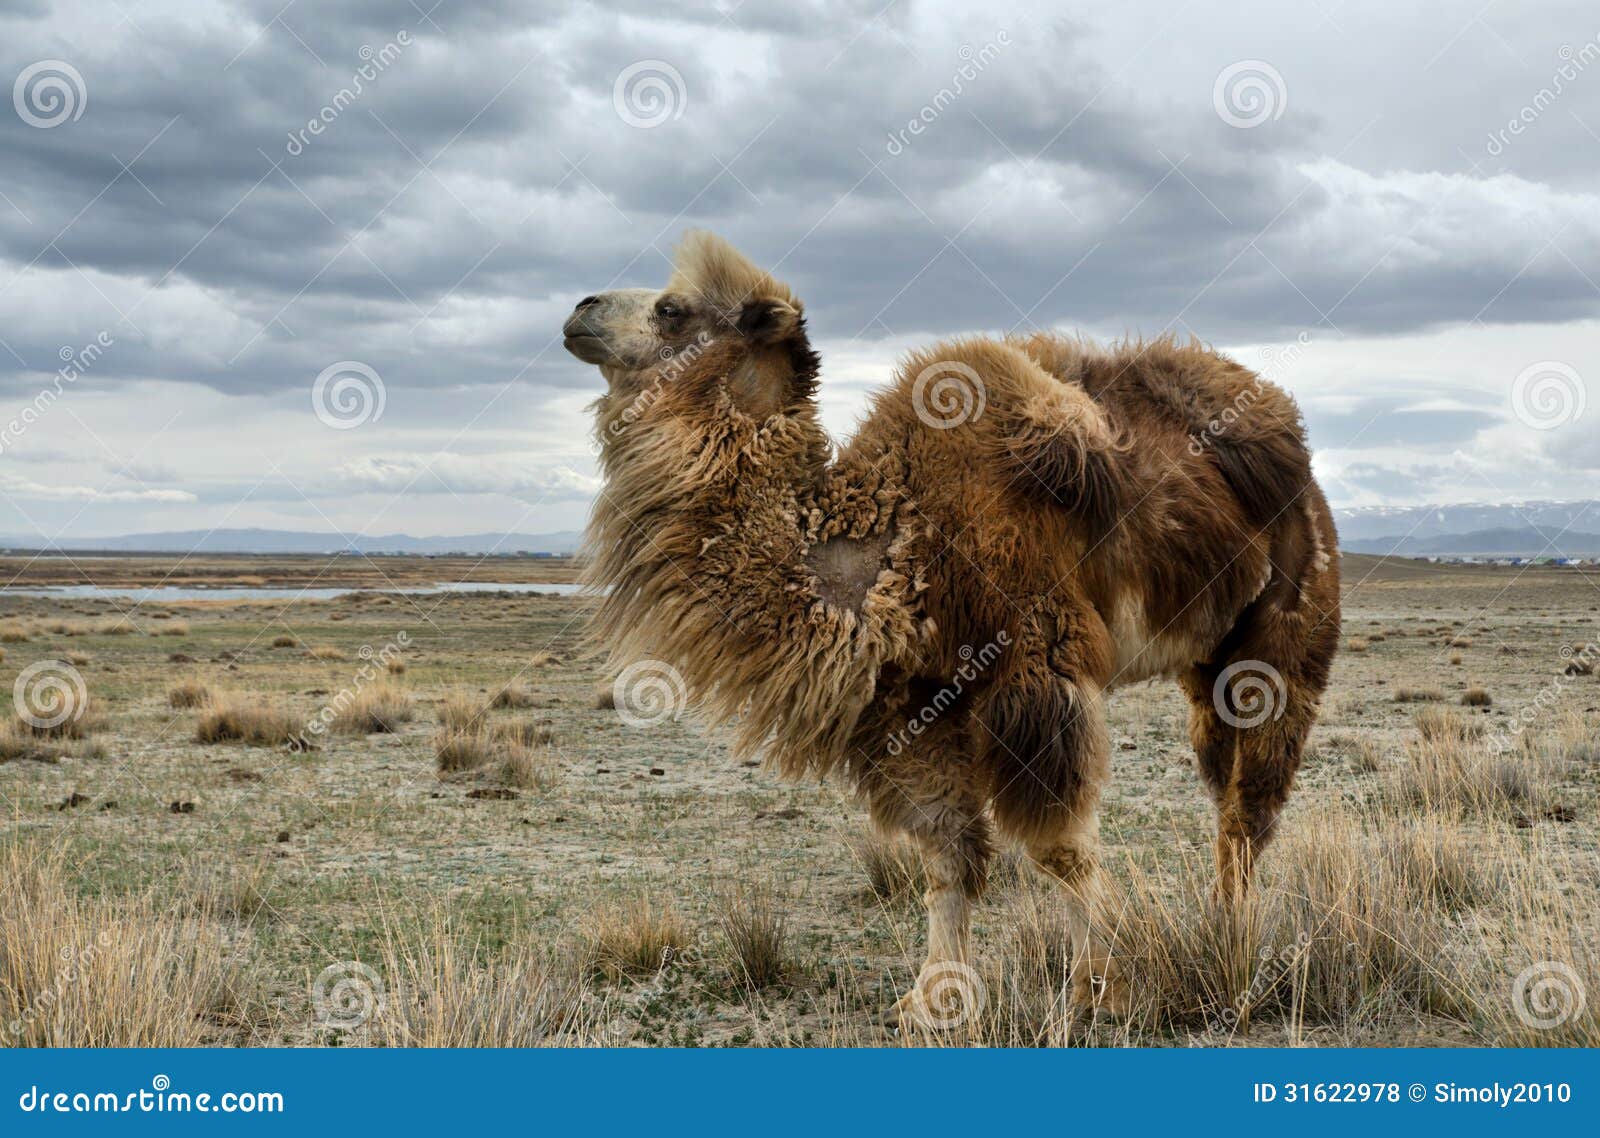 Camel stock photo. Image of hair, israel, outdoors, face - 31622978